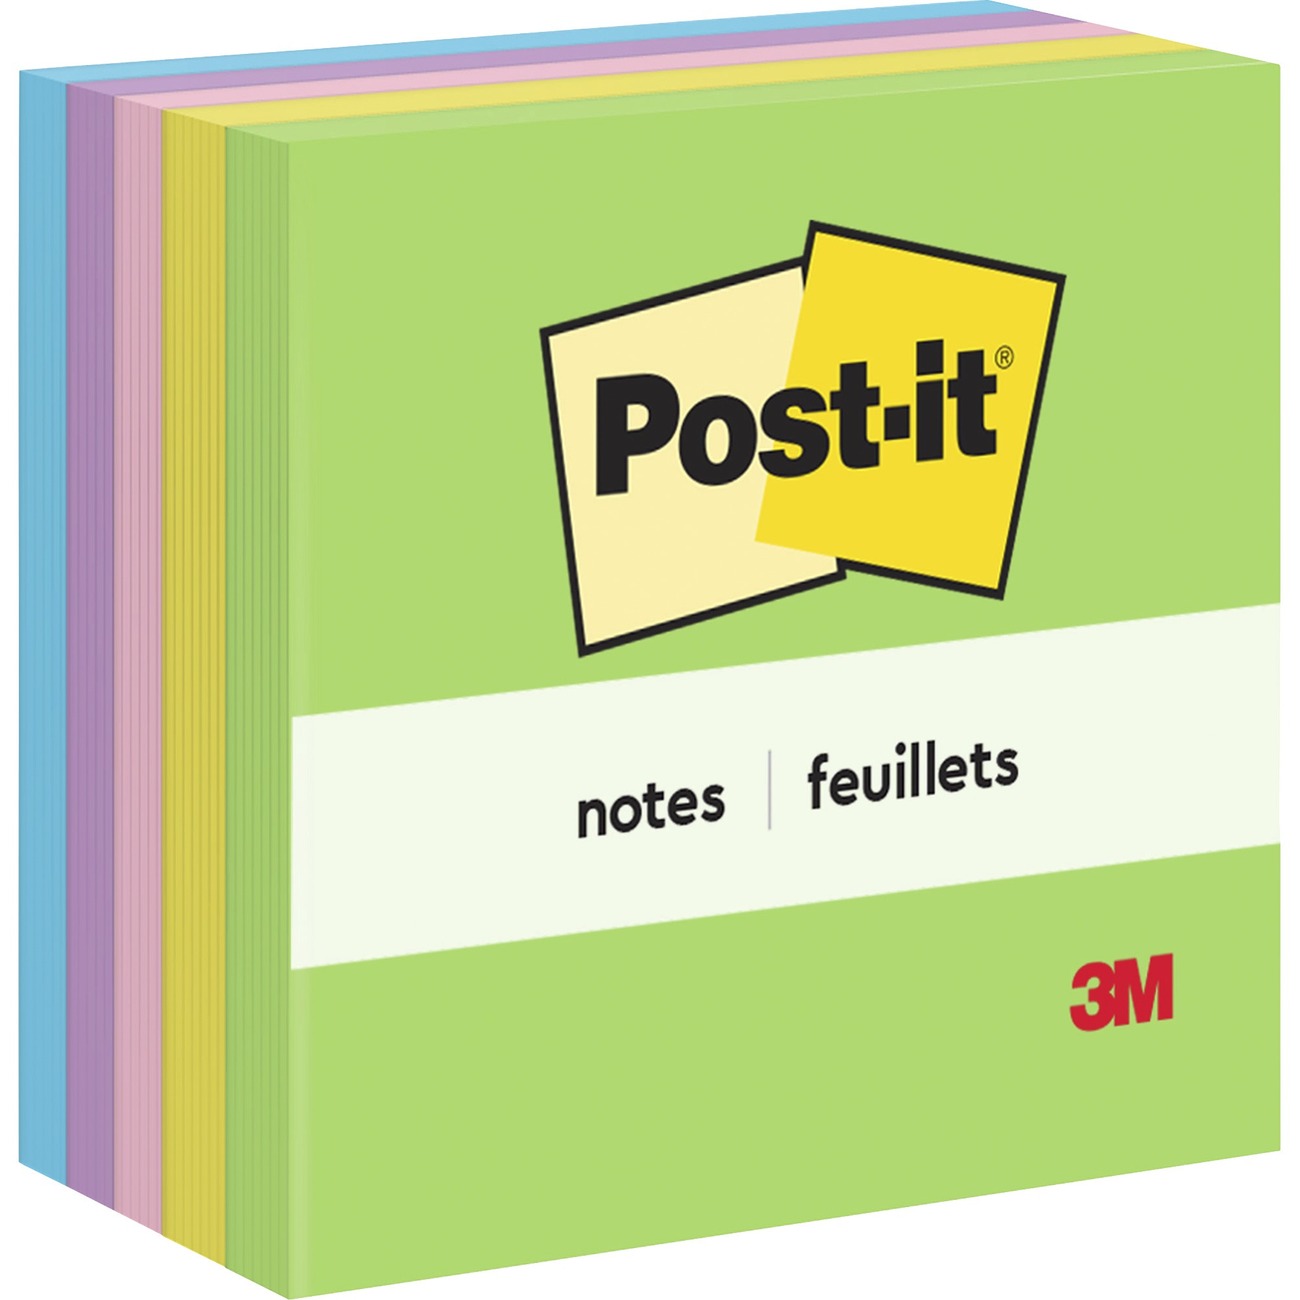 Post-it Original Sticky Notes, 1.5in. x 2in., Jaipur Collection, Assorted Colors - 12 Pack